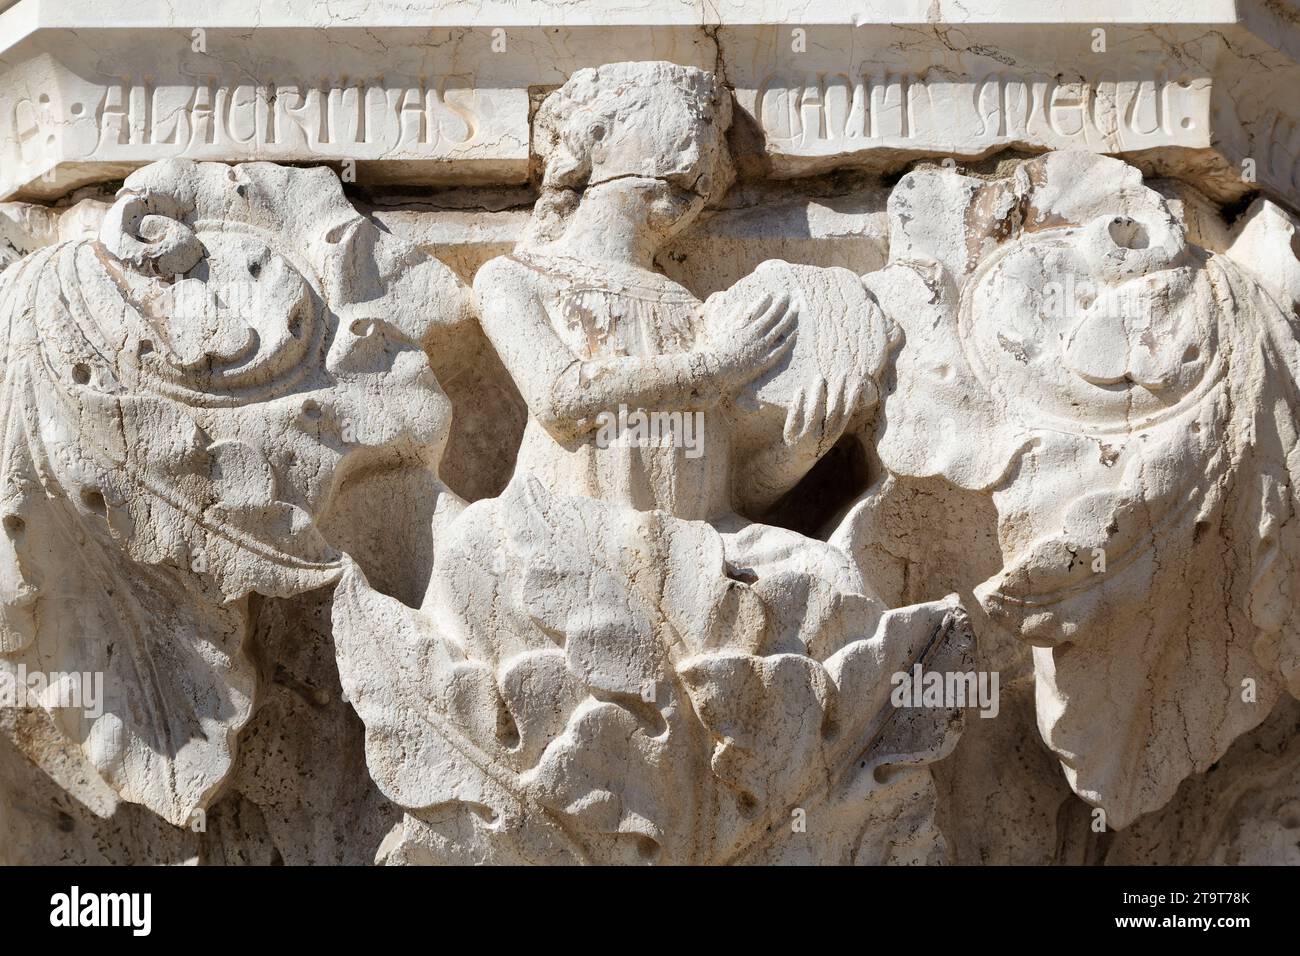 Alacrity - Virtues and vices - Column capital of Palazzo Ducale (Doge's Palace, St Mark's Square) - Venice Stock Photo